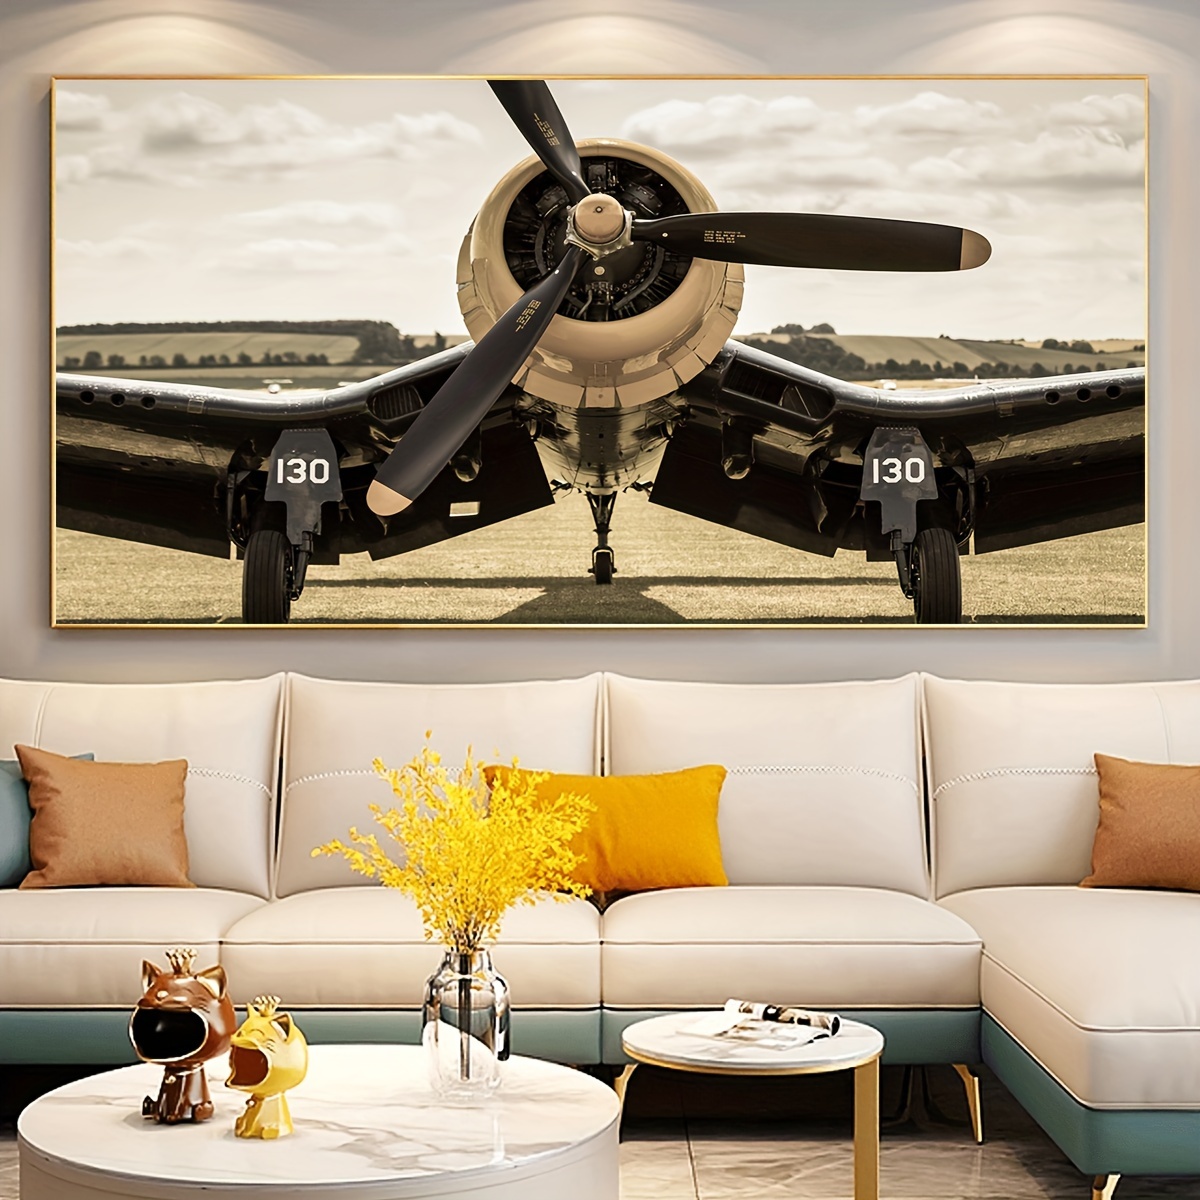 

1pc Unframed Creative Canvas Print Poster, Aircraft Painting, Waterproof Canvas Wall Art, Artwork Wall Painting For Bedroom, Office, Cafe, Bar, Living Room, Wall Decor, Home And Dormitory Decoration